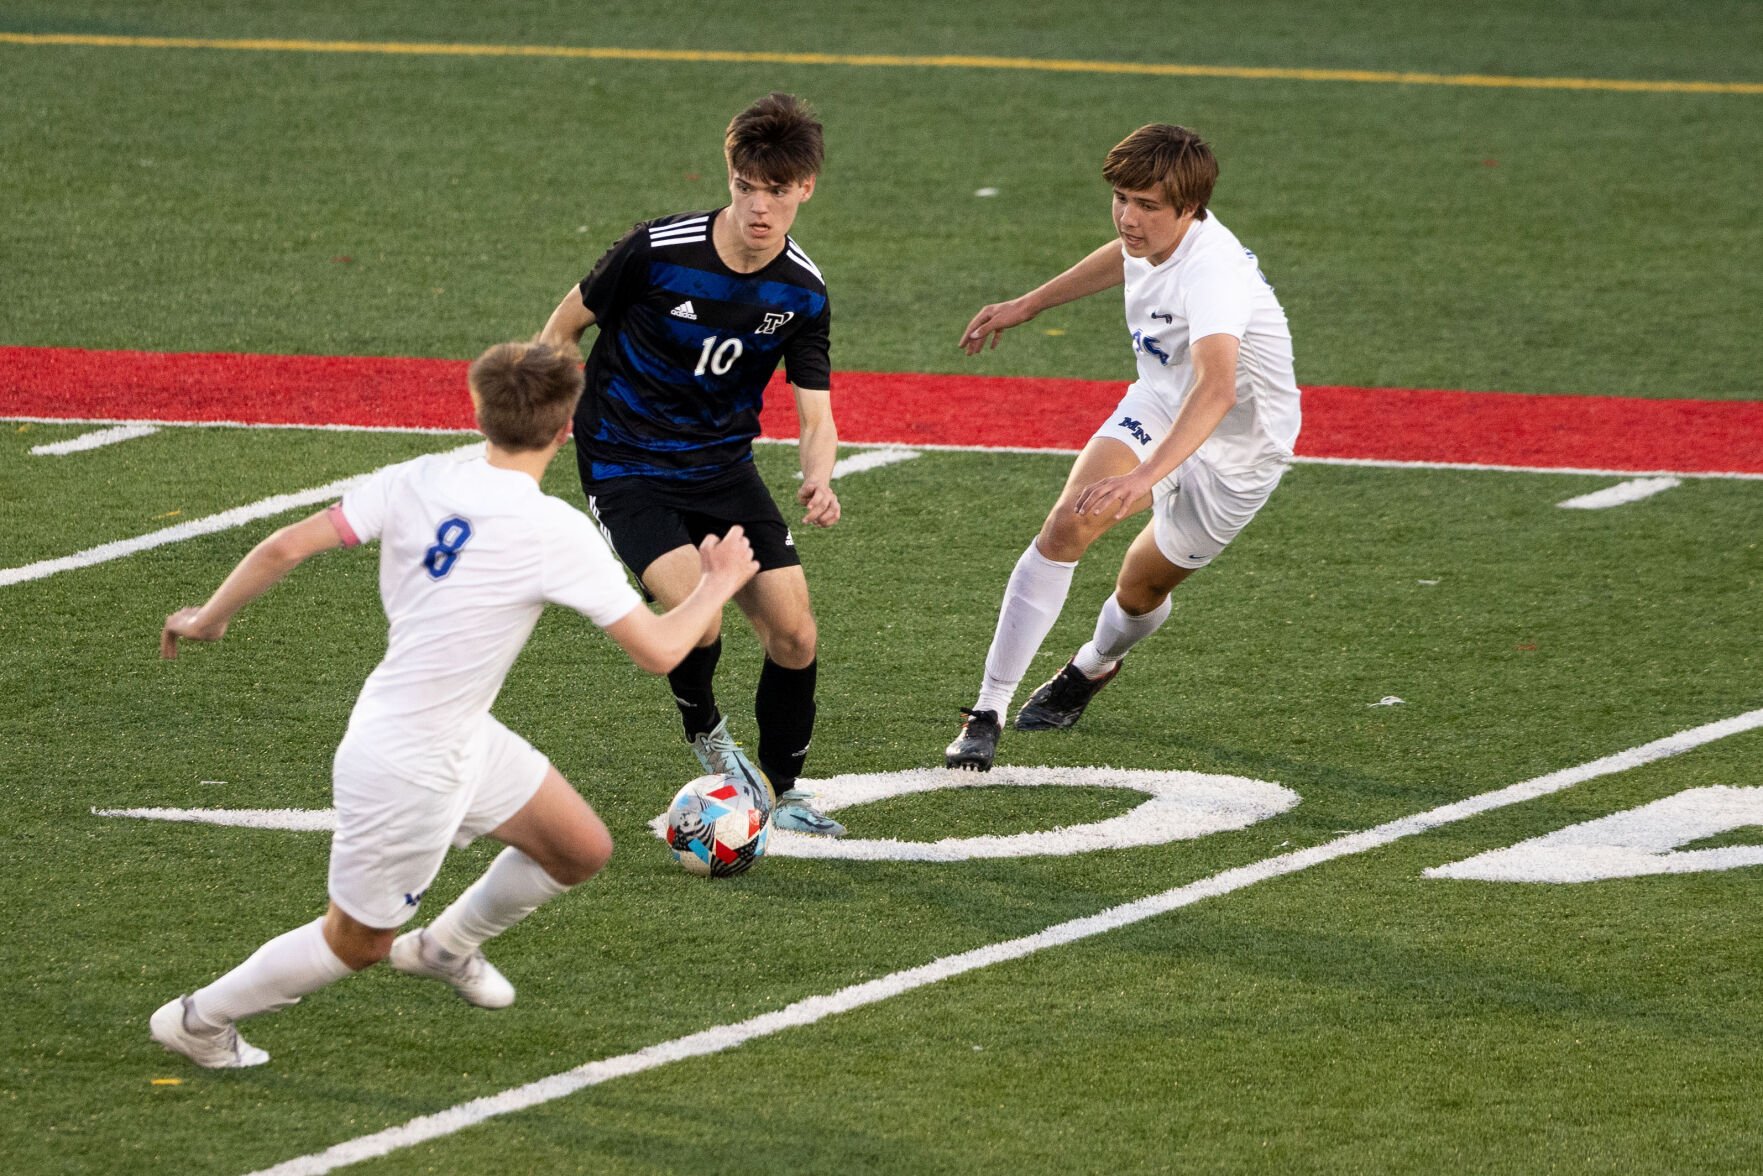 Papio South holds off Millard North for Metro conference soccer title